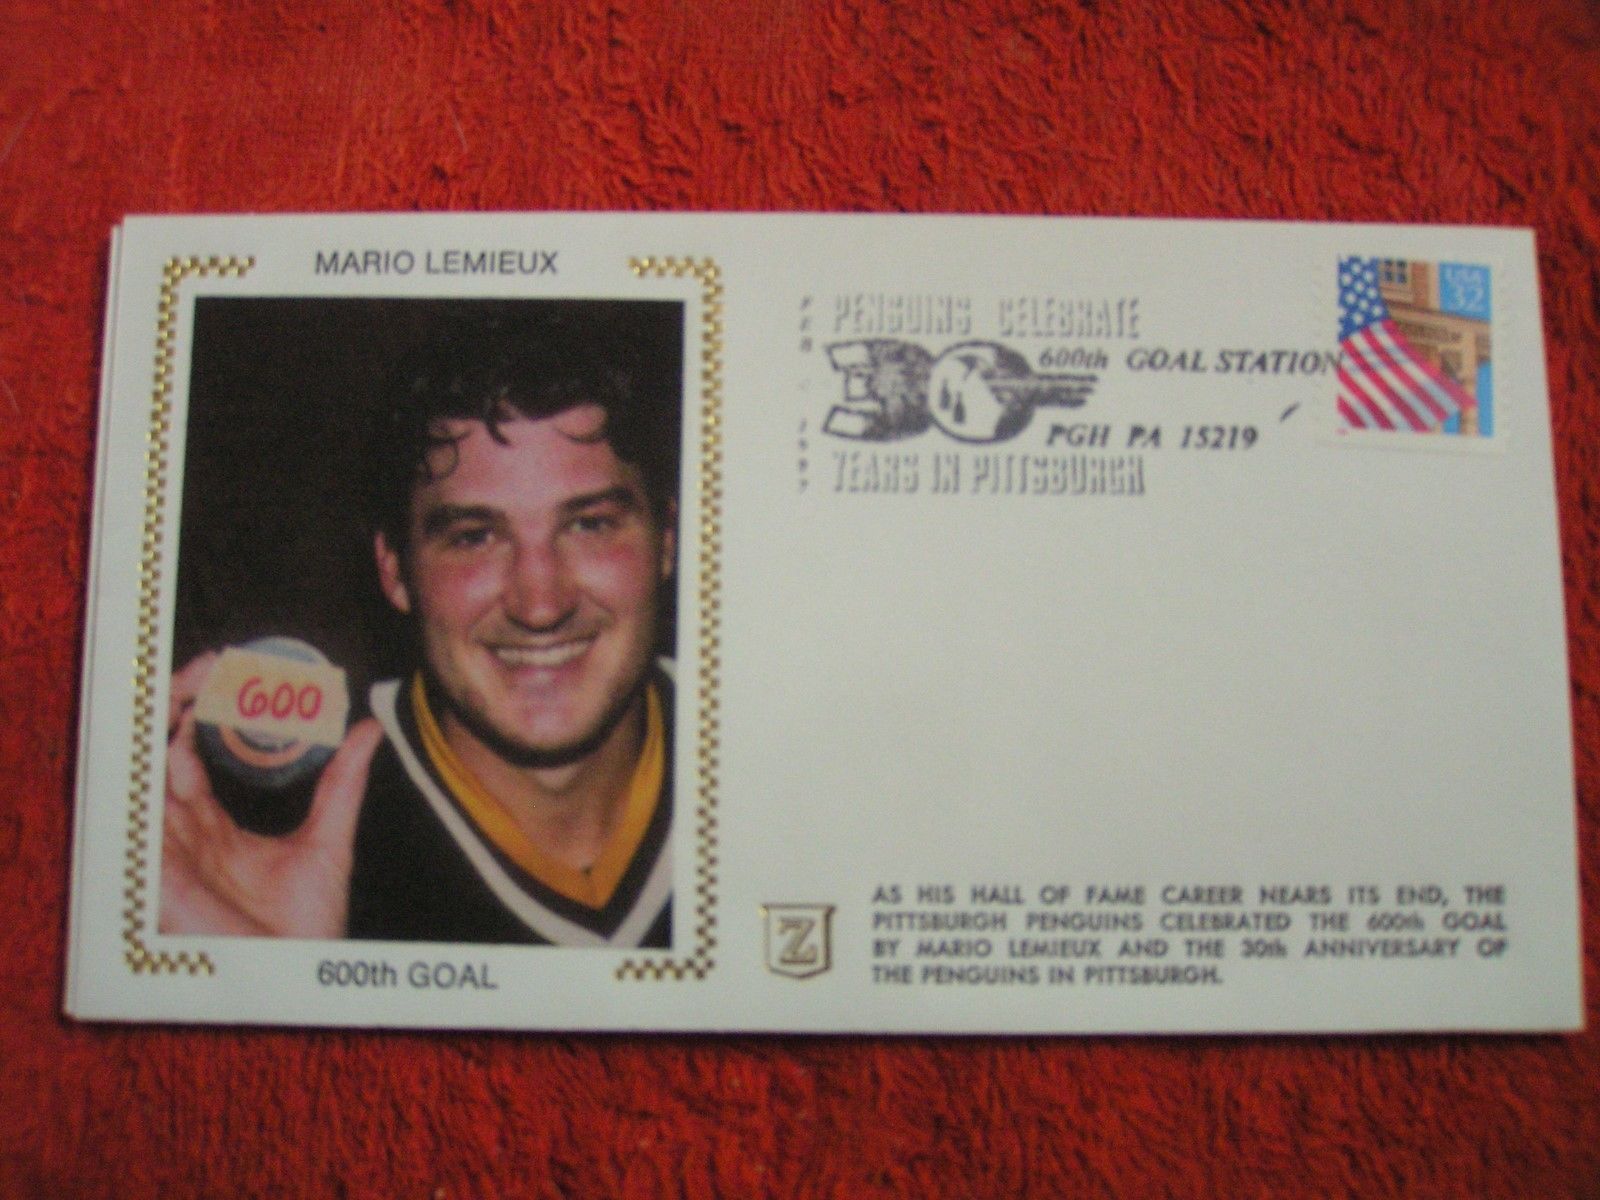 Primary image for NHL Mario Lemieux 600th Goal Pittsburgh Penguins FDC CACHET ENVELOPE  2/1997